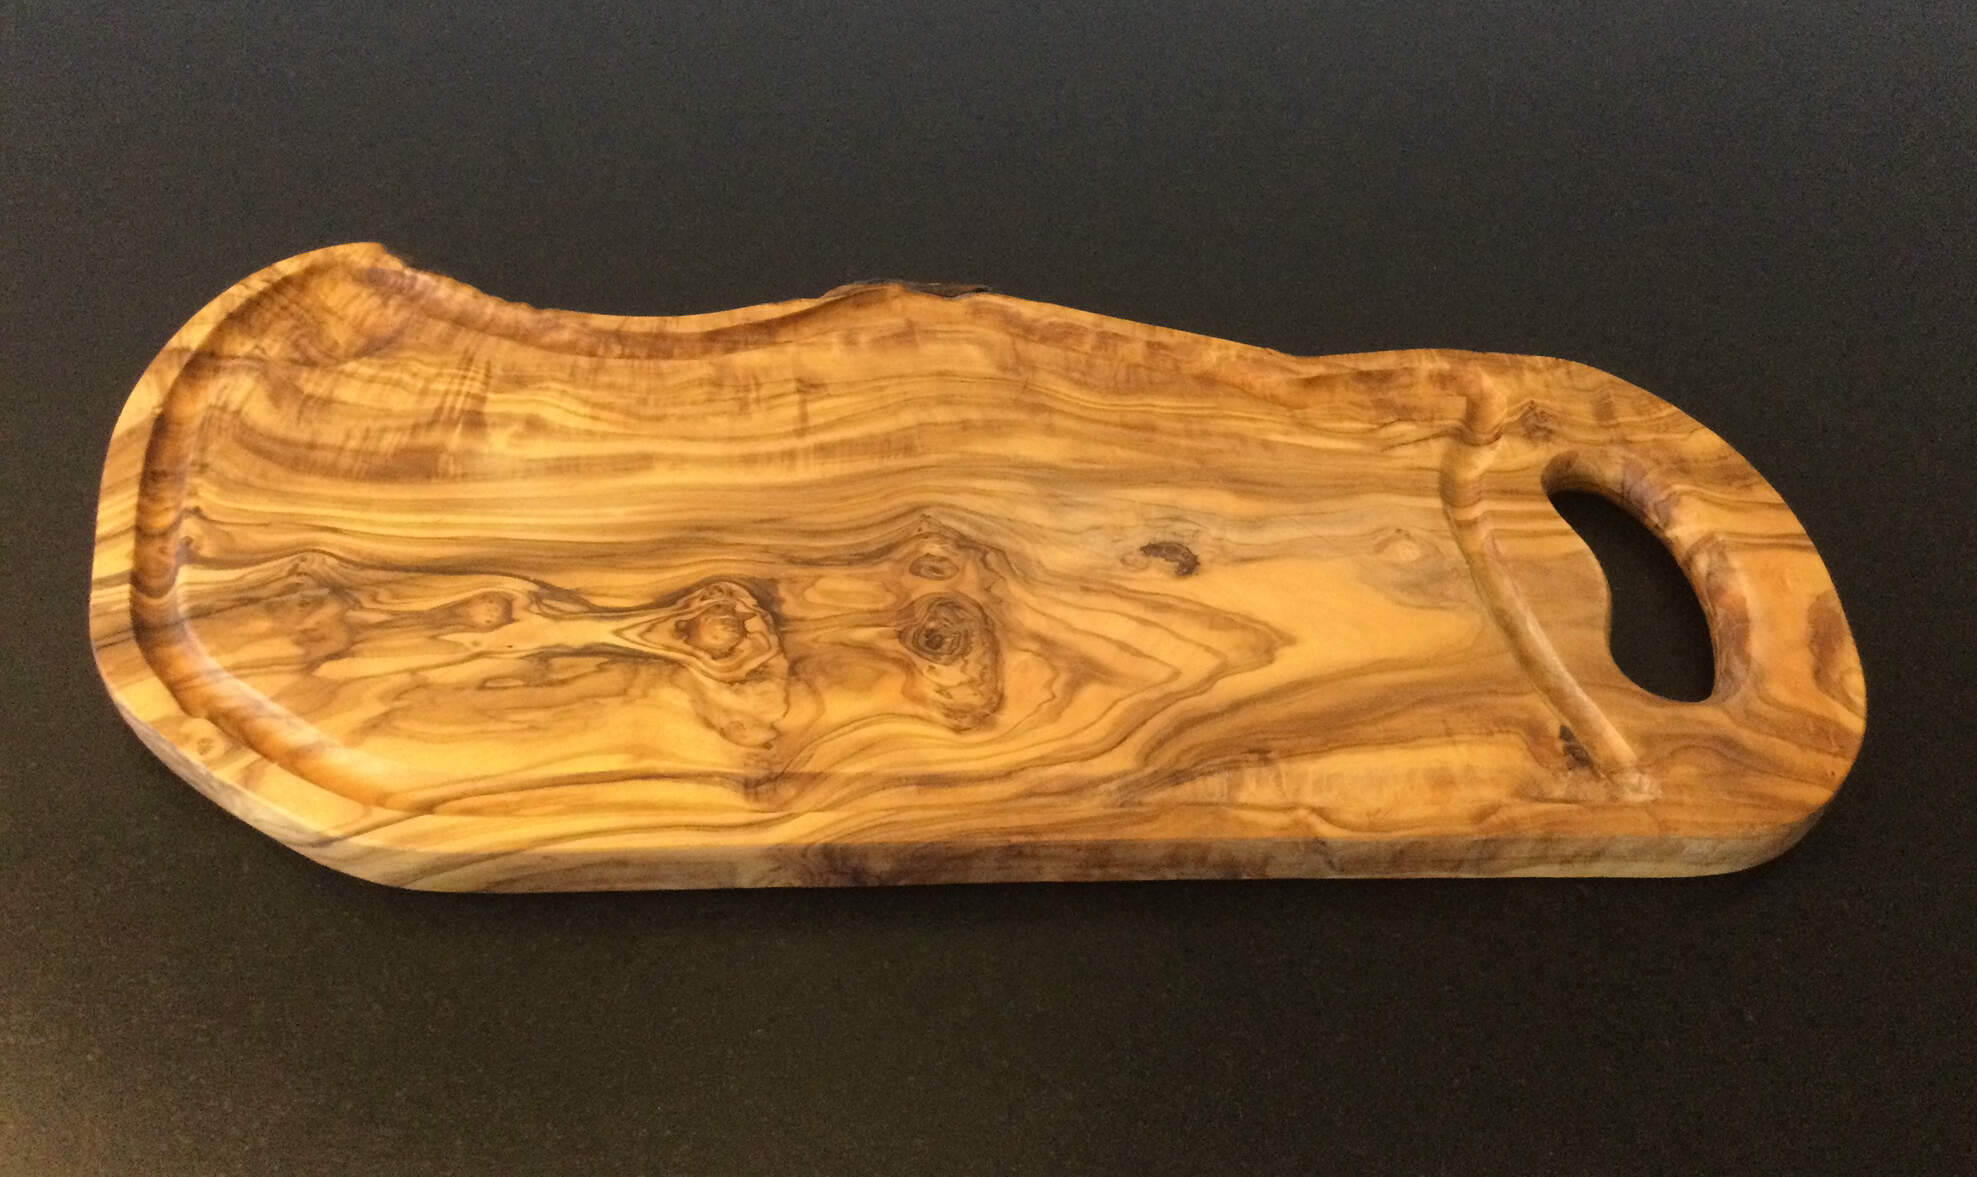 Olive wood: Board with groove and handle.